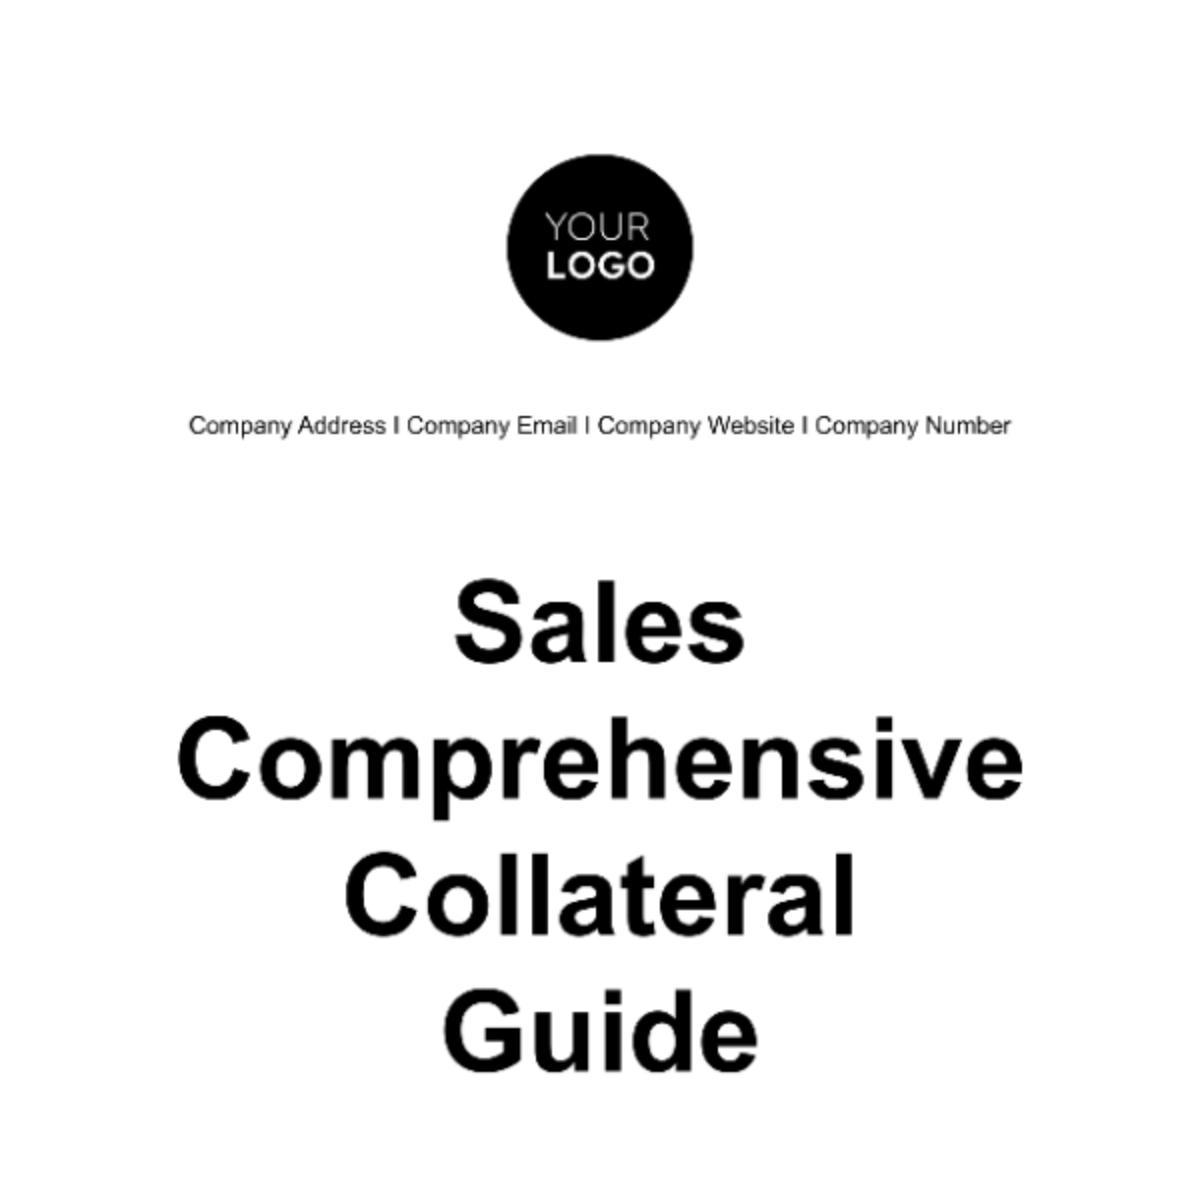 Sales Comprehensive Collateral Guide Template